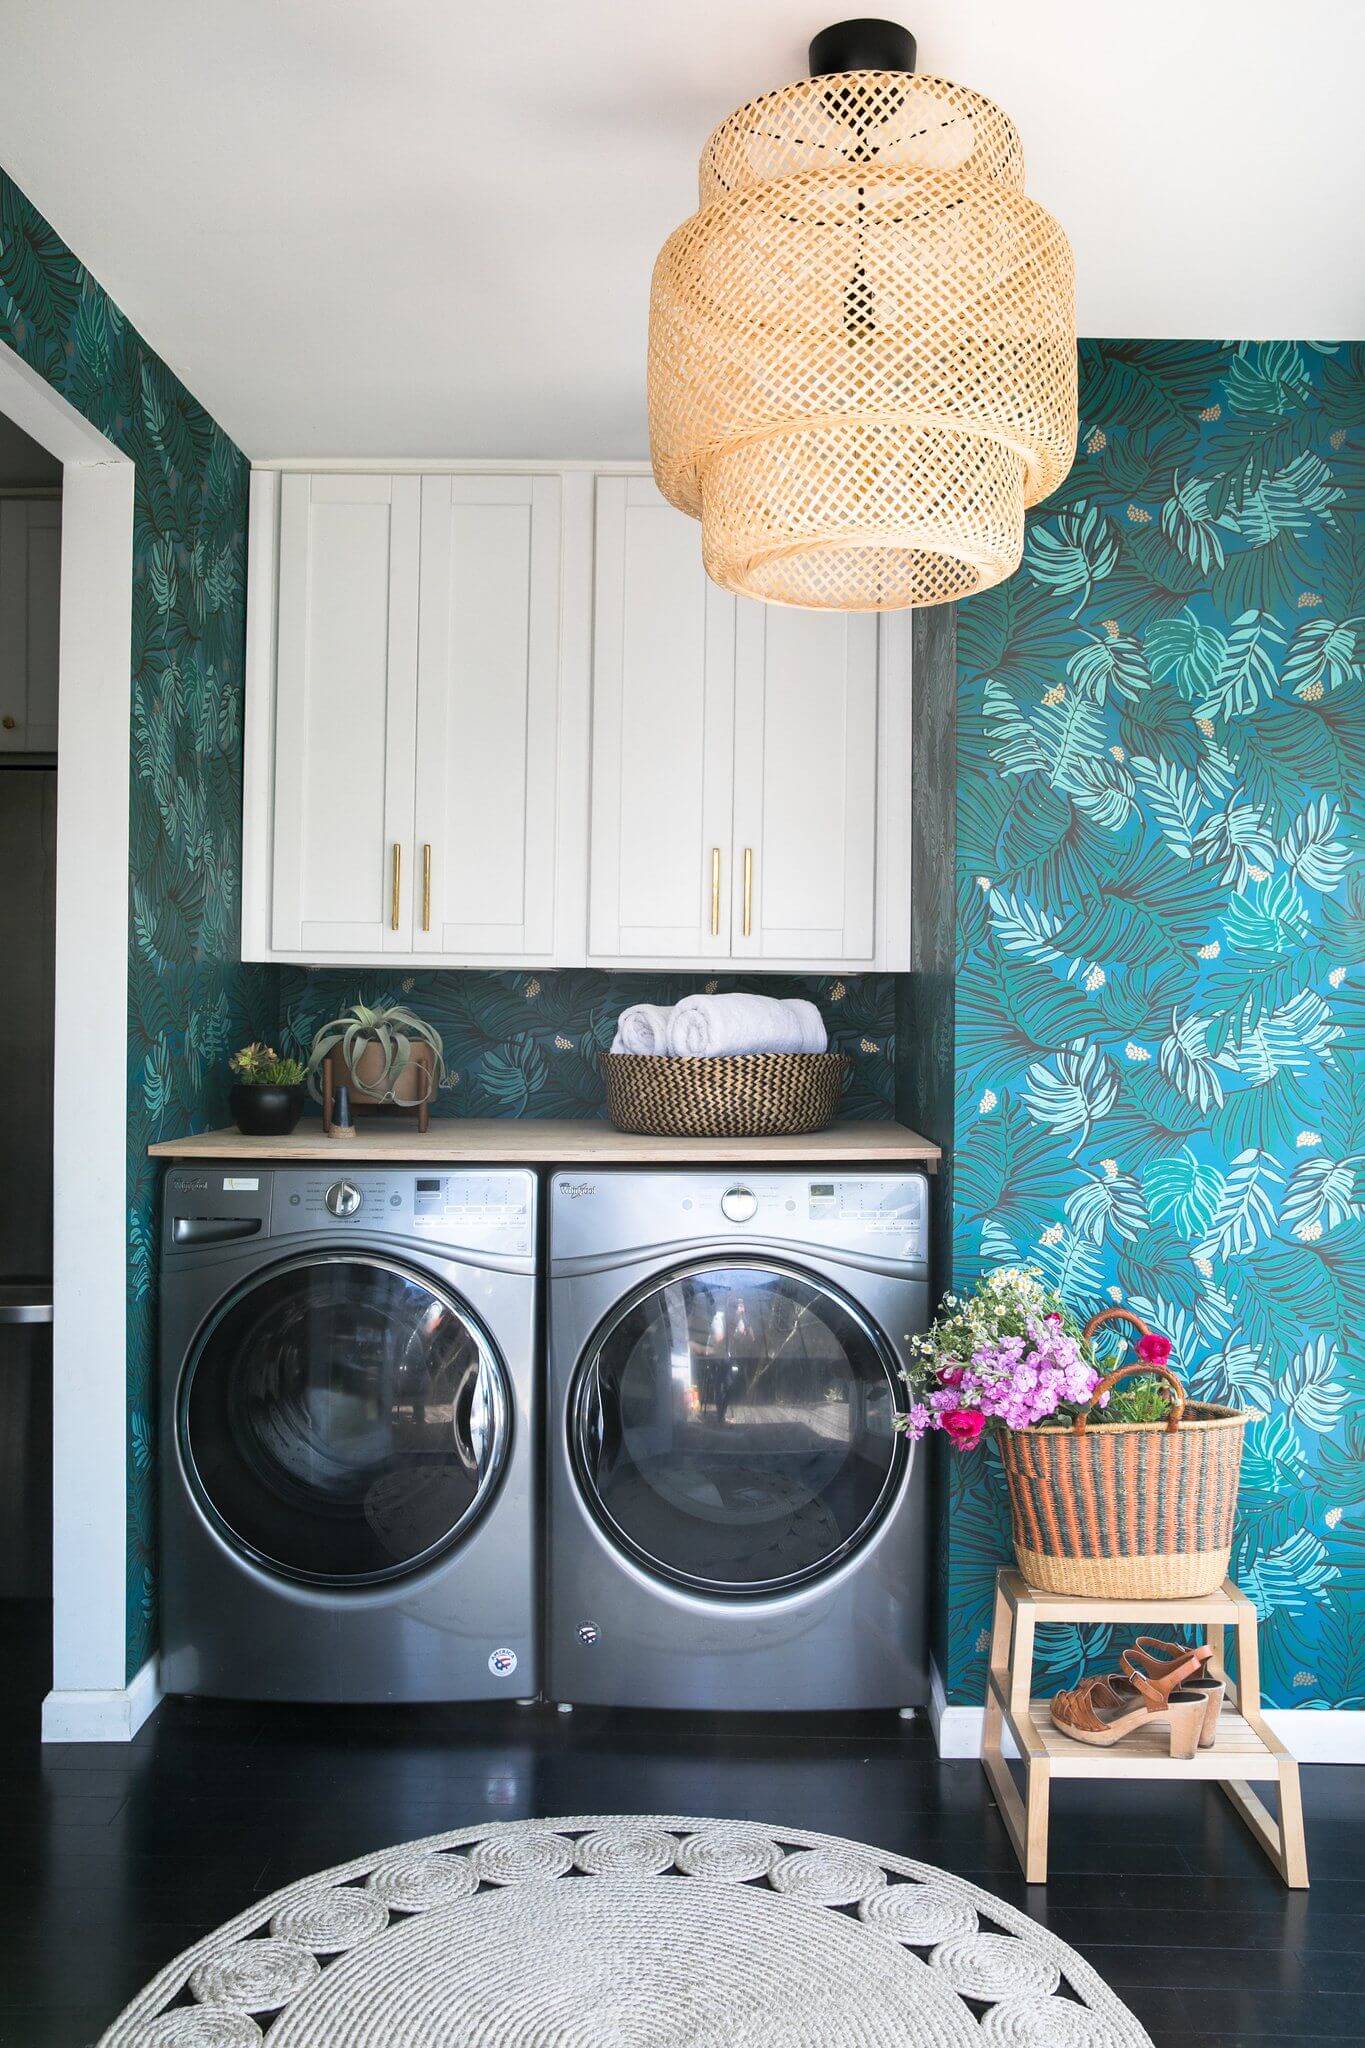 20 Laundry Room Organization Ideas for Small Room & Decor image in 2020 ...